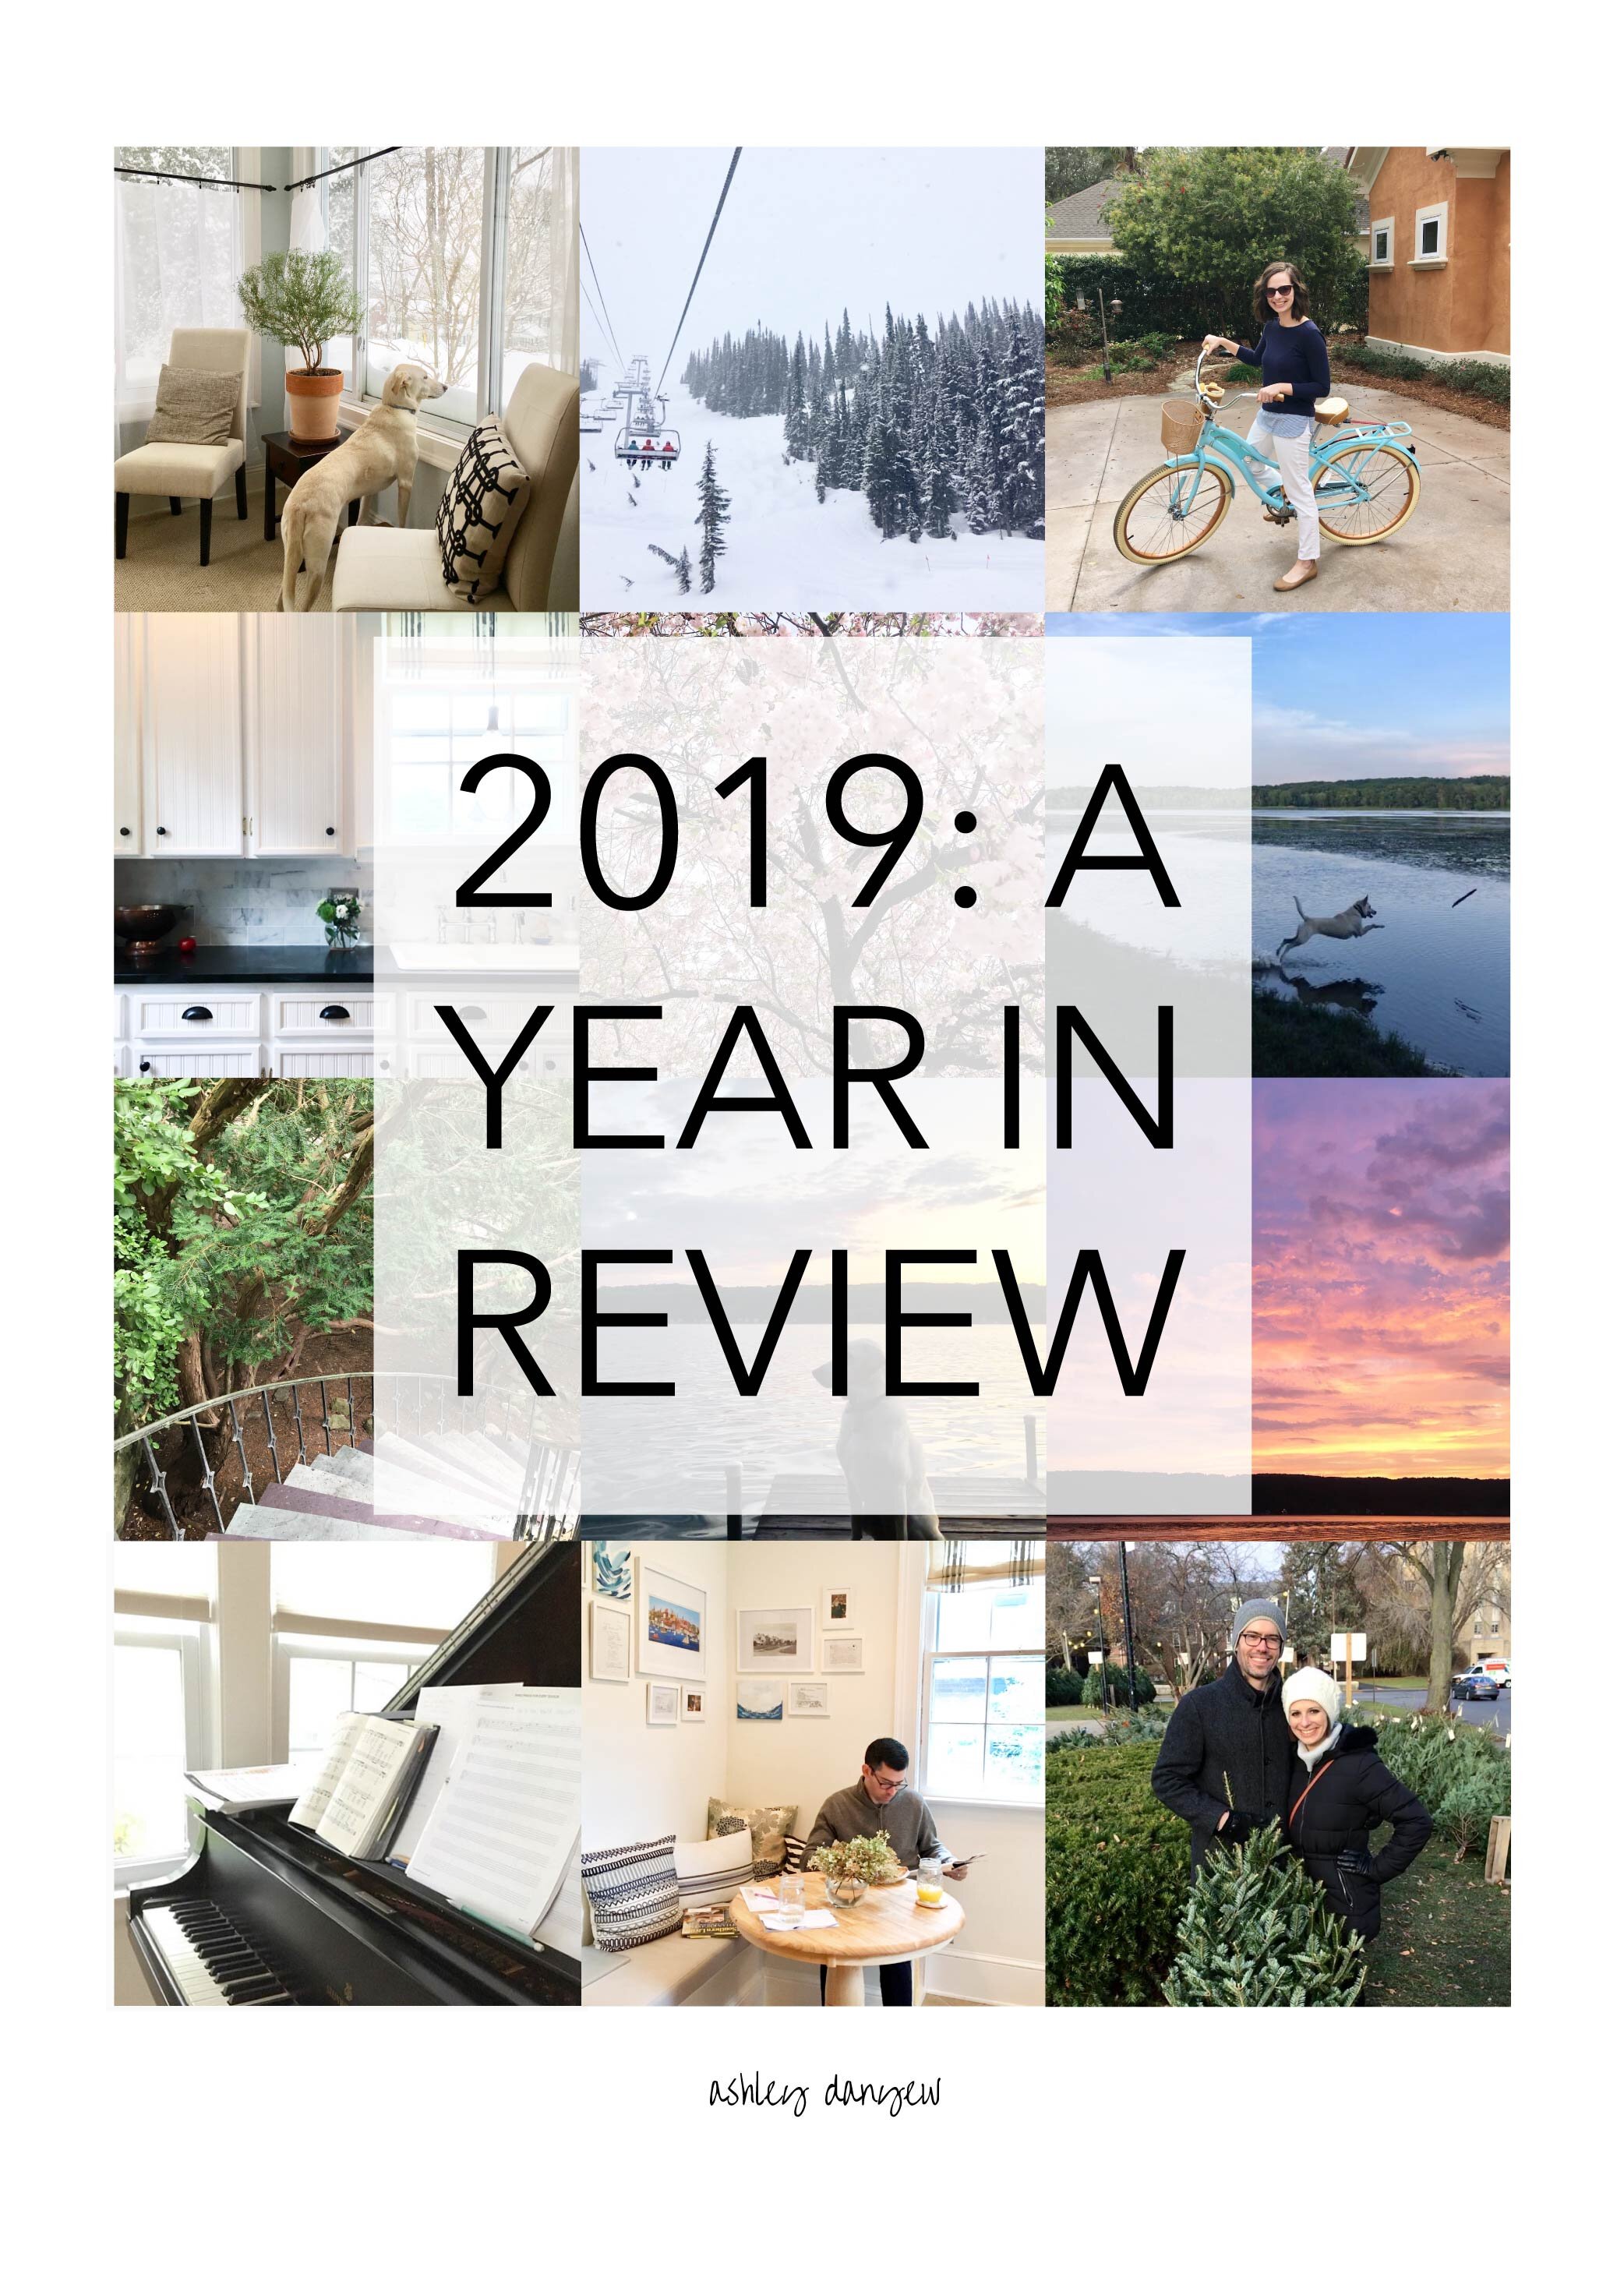 2019: A Year in Review (Copy)